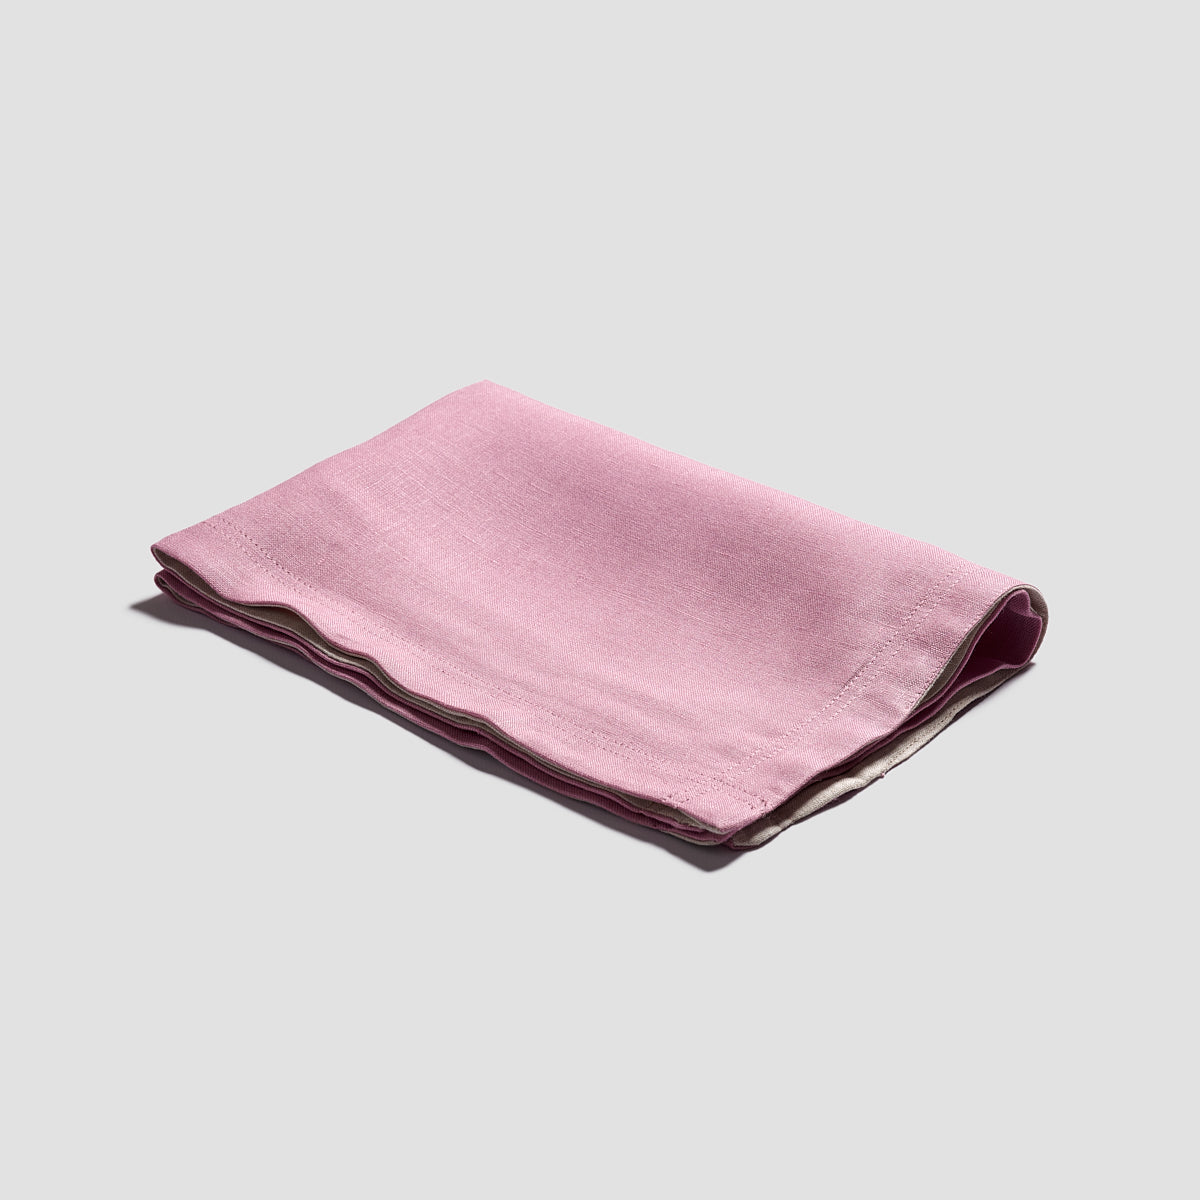 Raspberry Linen Placemat Set - Piglet in Bed